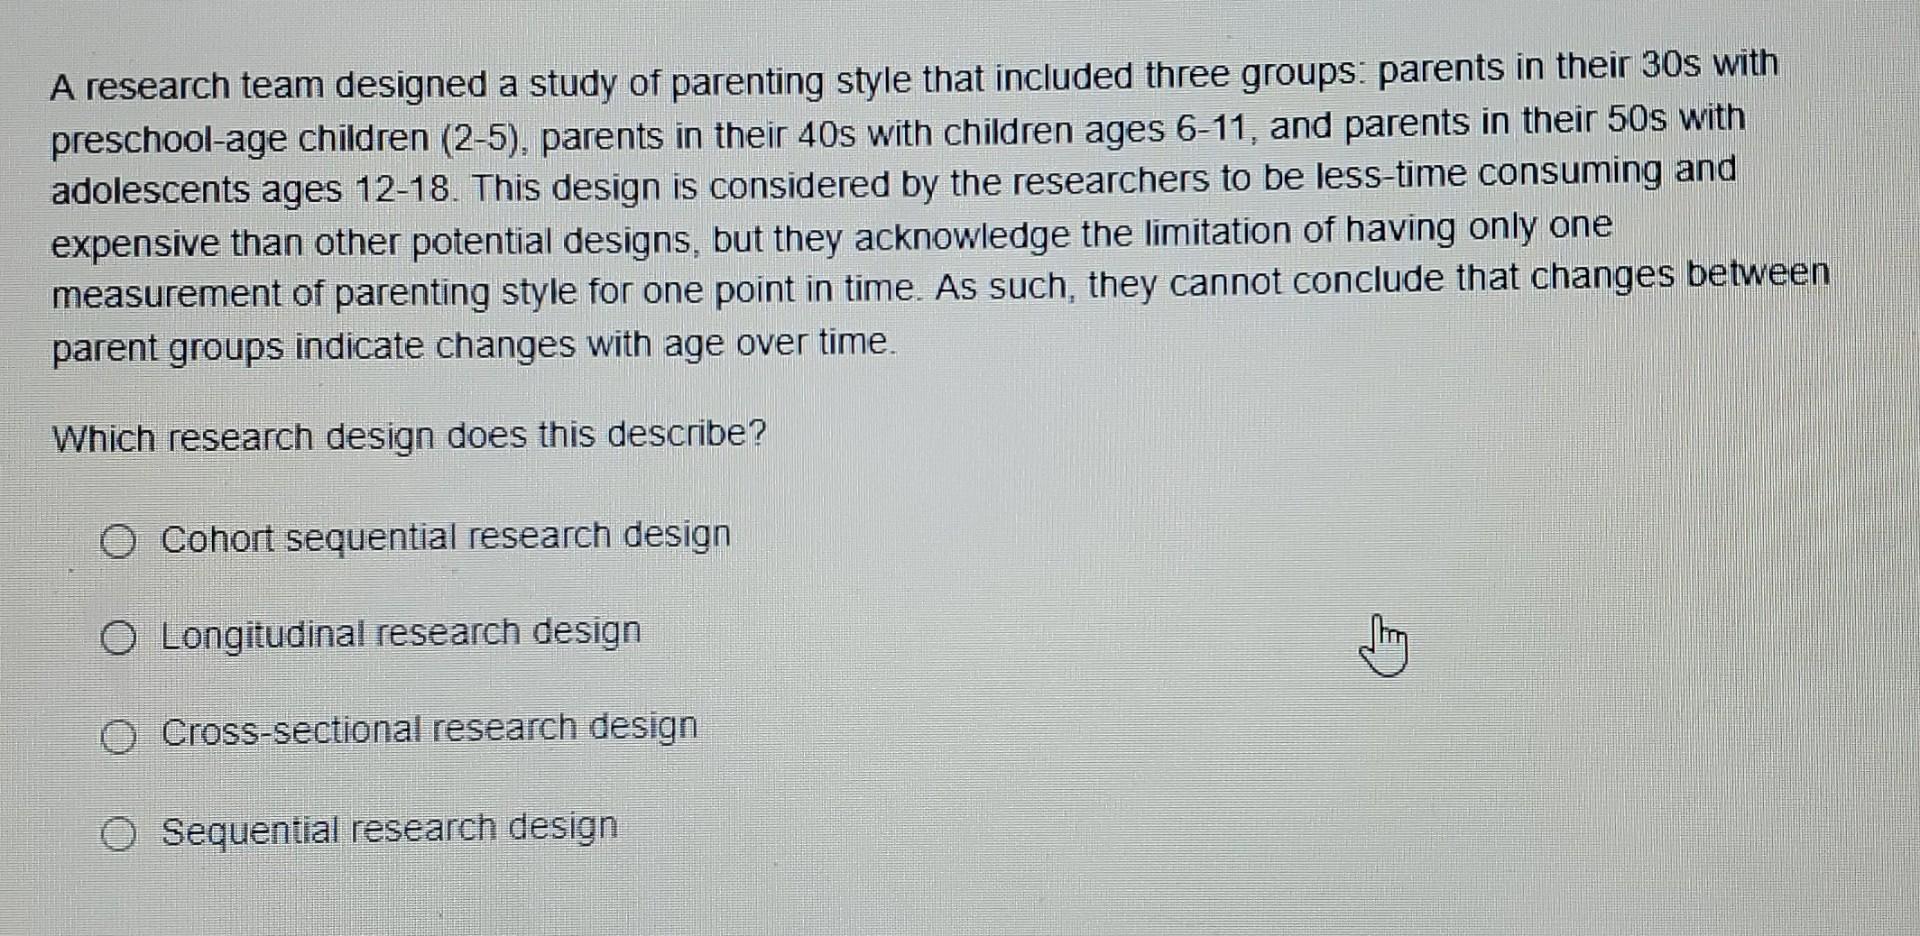 a research team designed a study of parenting